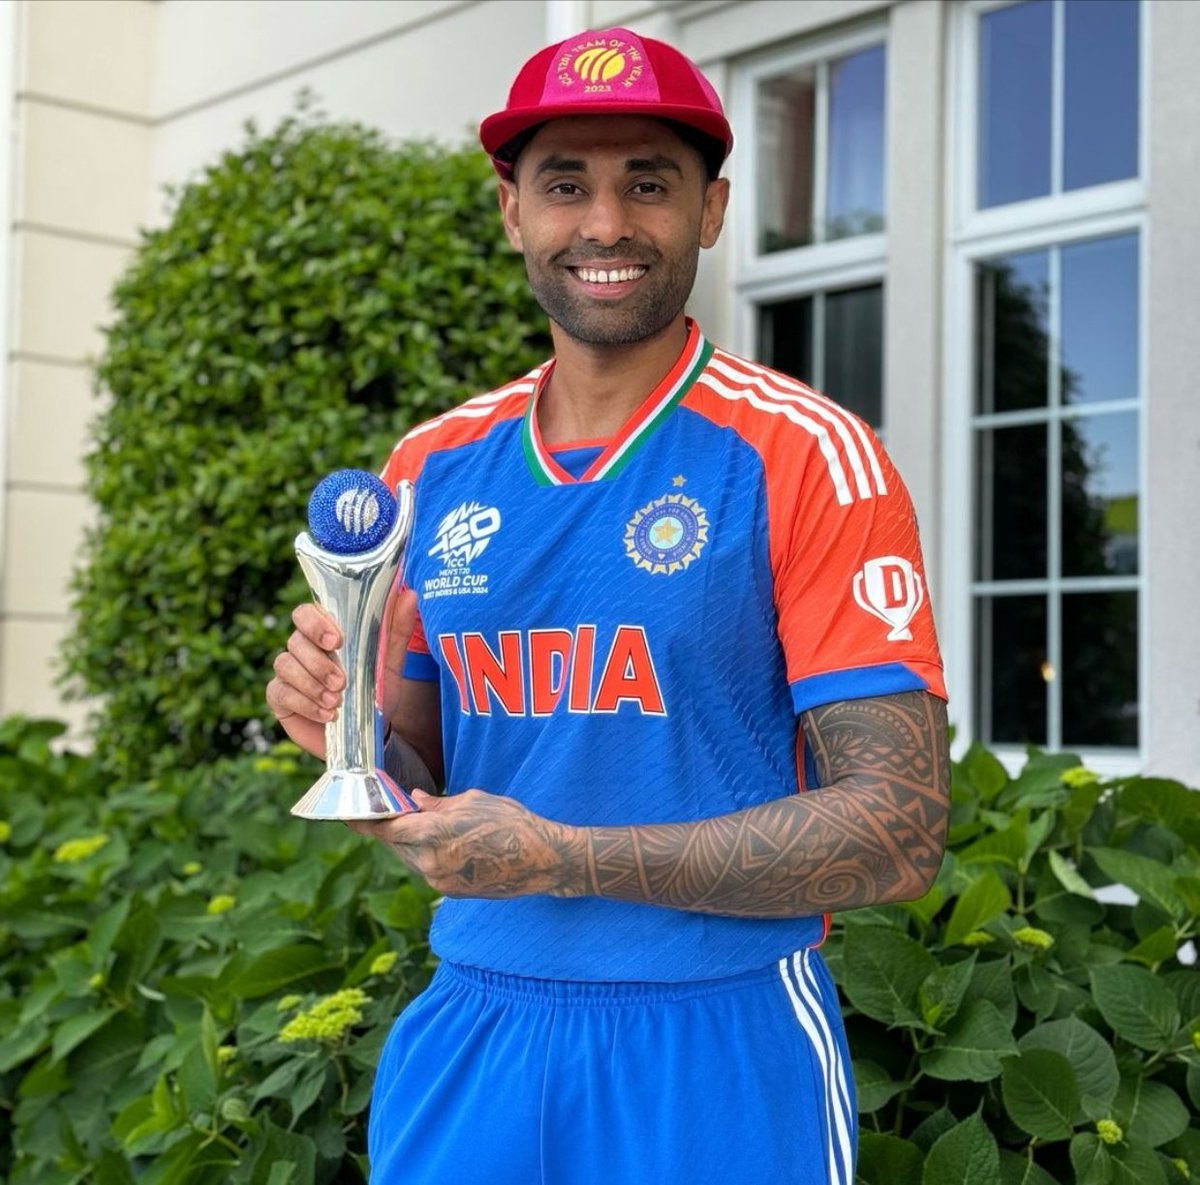 Suryakumar Yadav with the ICC T20I Player of the year award. 🌟 - The best T20 batter currently in cricket.